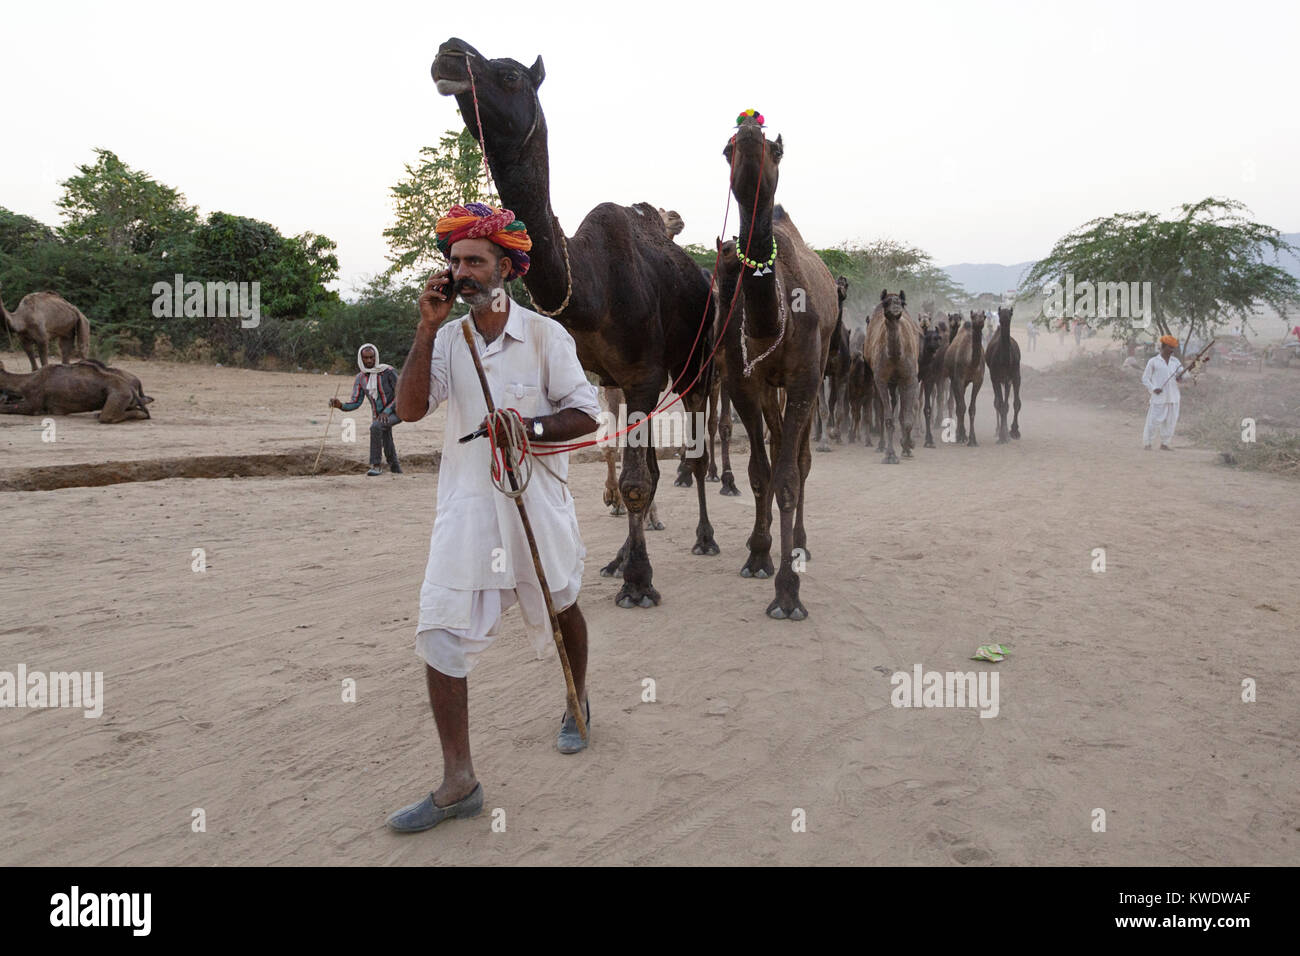 Trader wearing turbans and traditional clothing taking his herd of